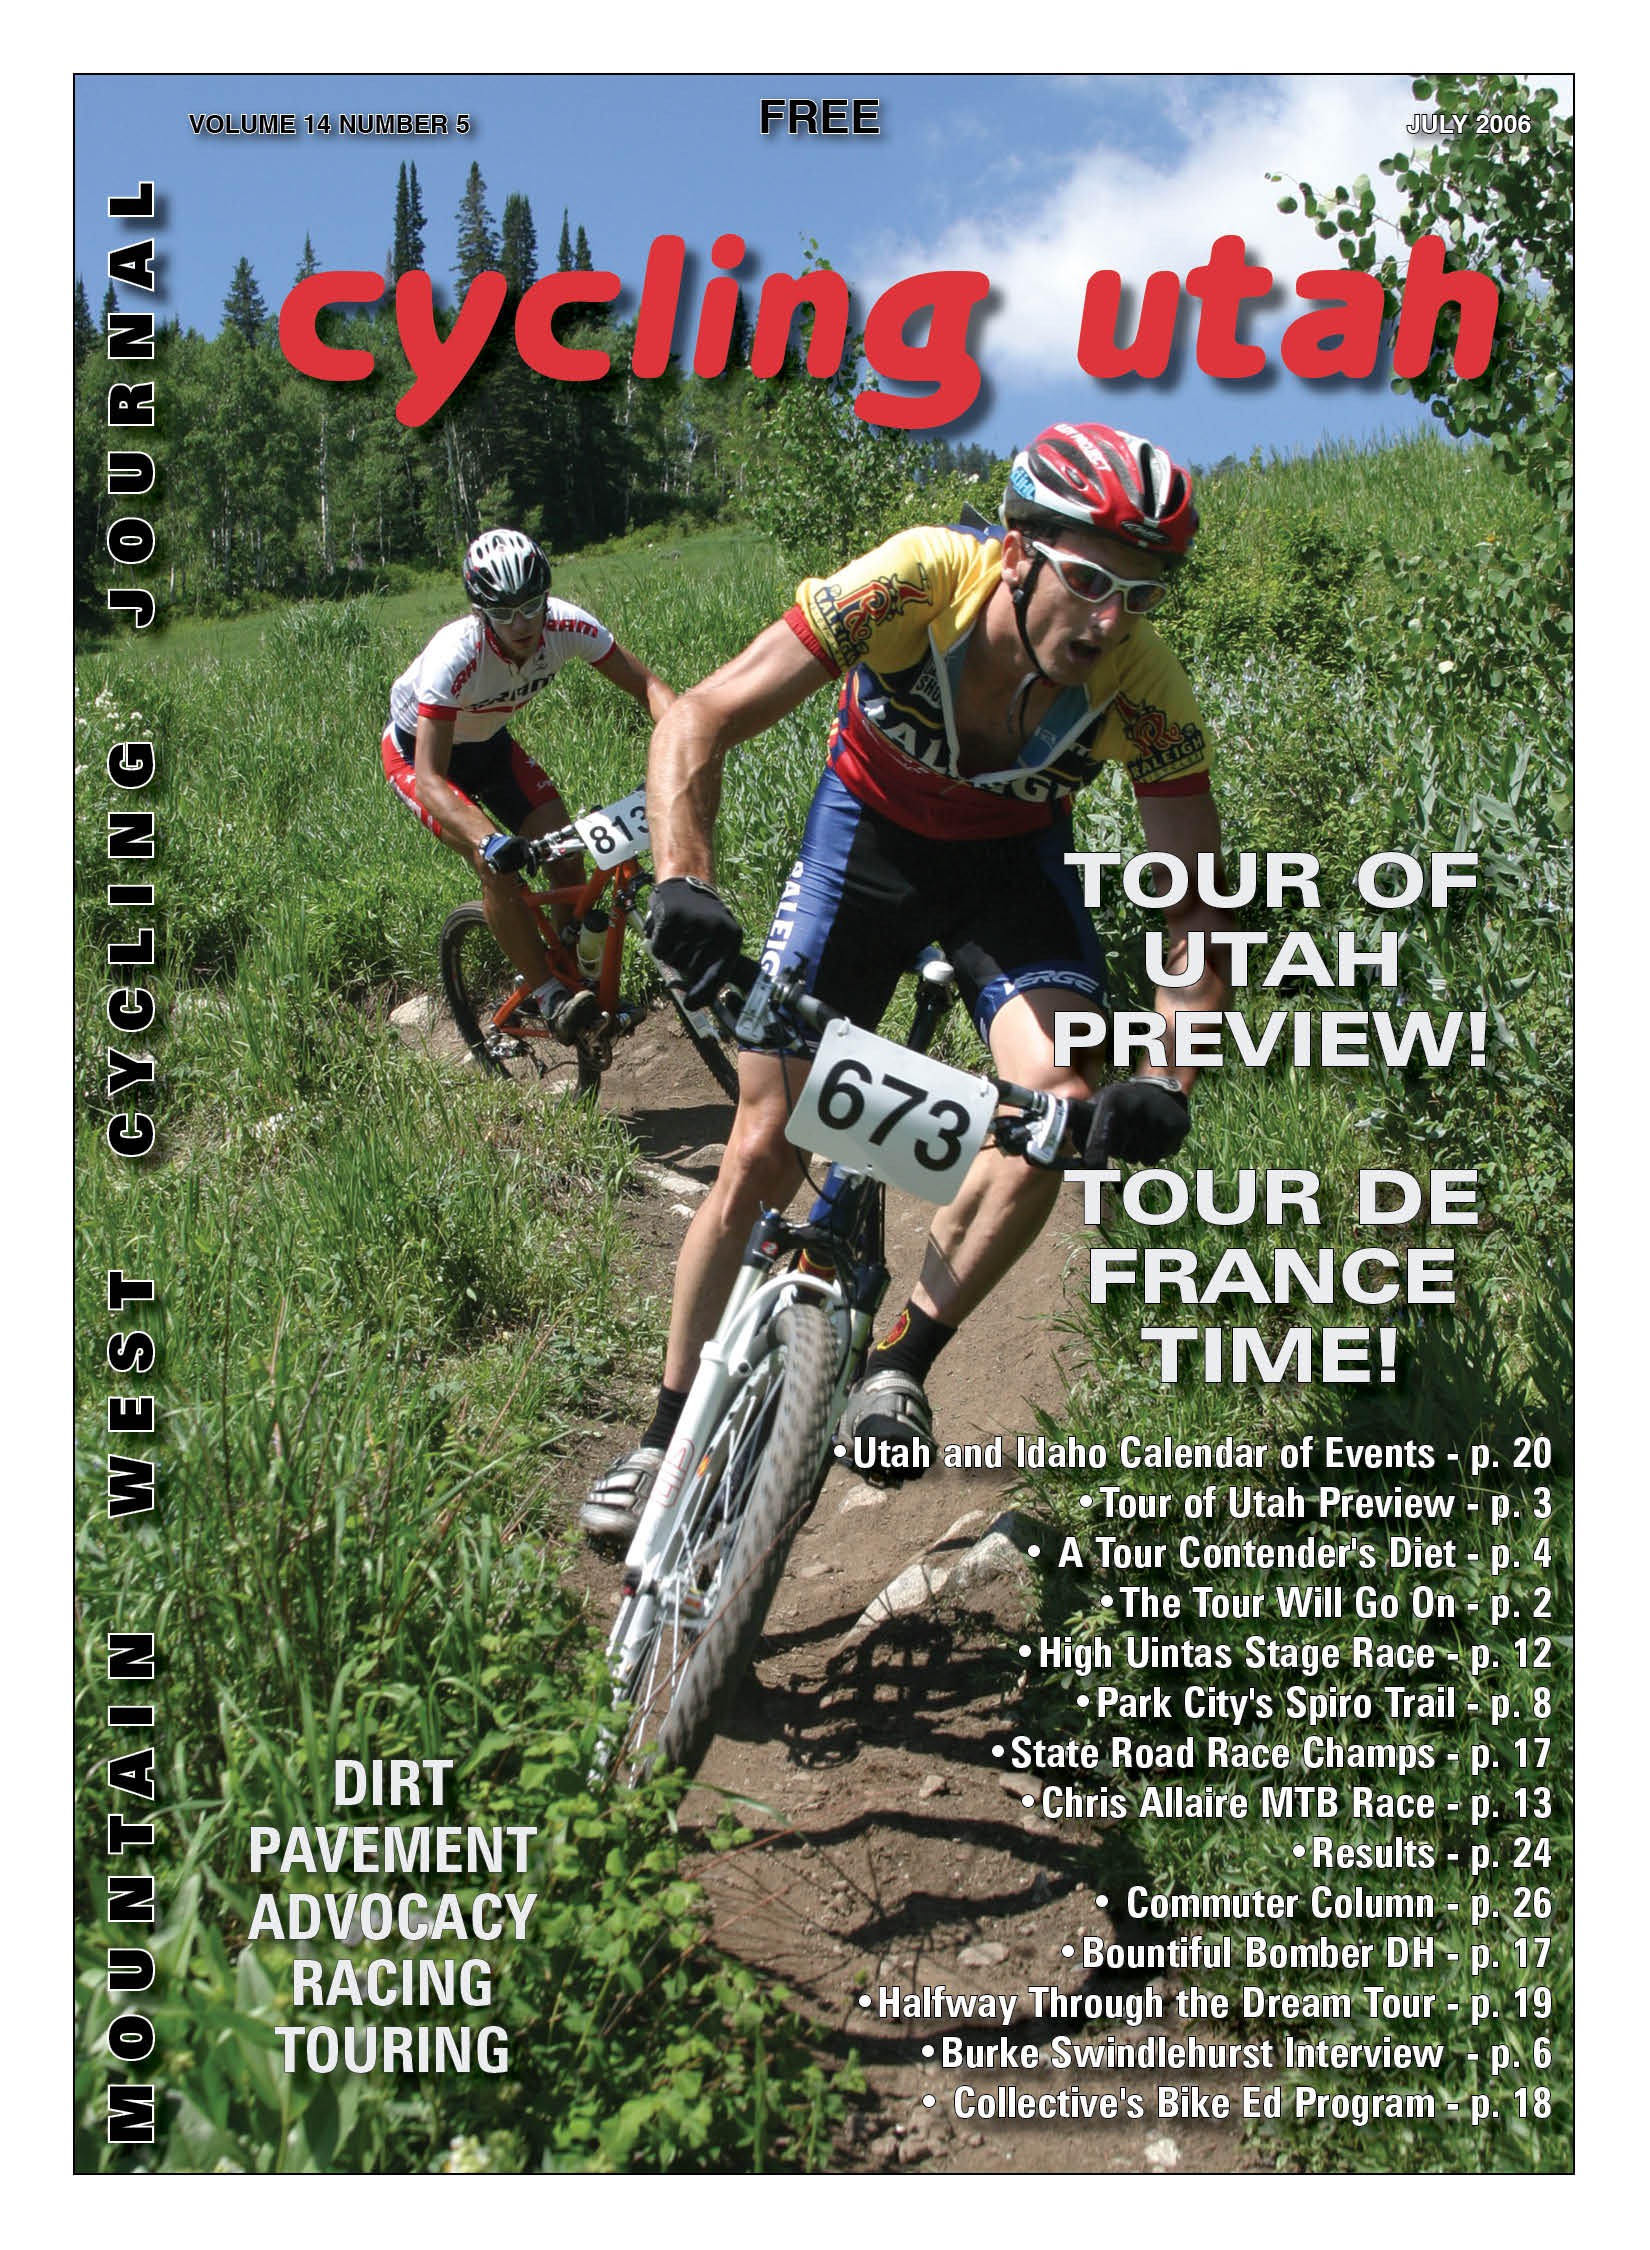 Cycling Utah’s July 2006 Issue is Now Available!